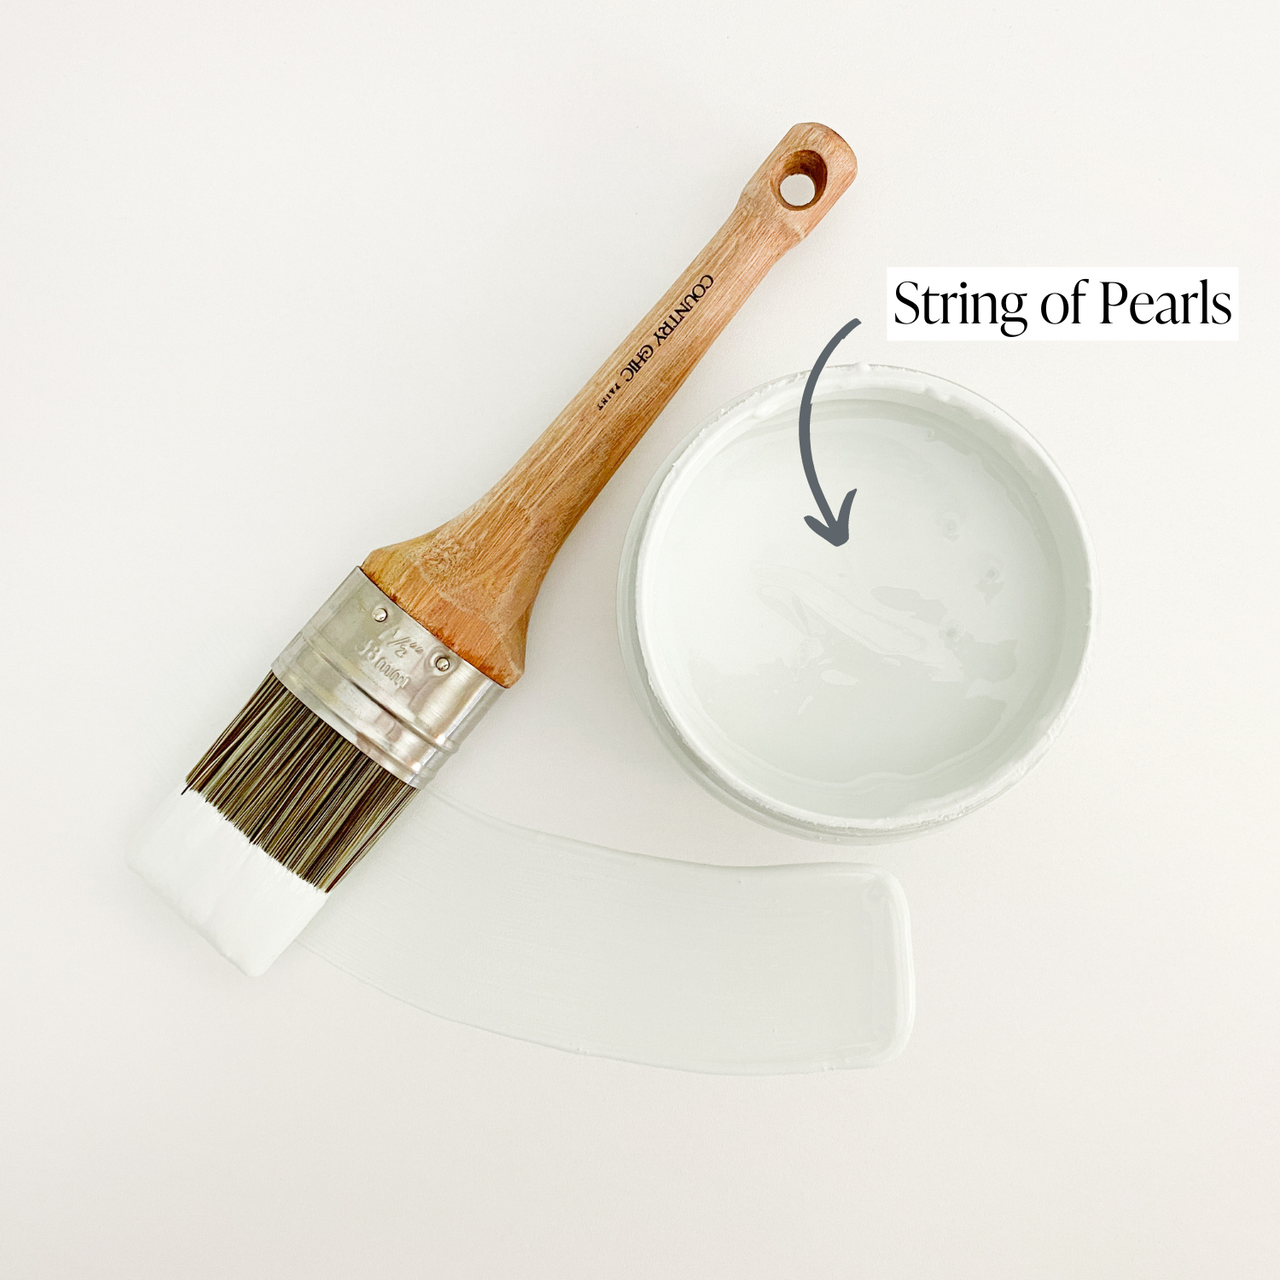 String of pearls 4oz Country Chic Paint - Chalk Style All-in-One